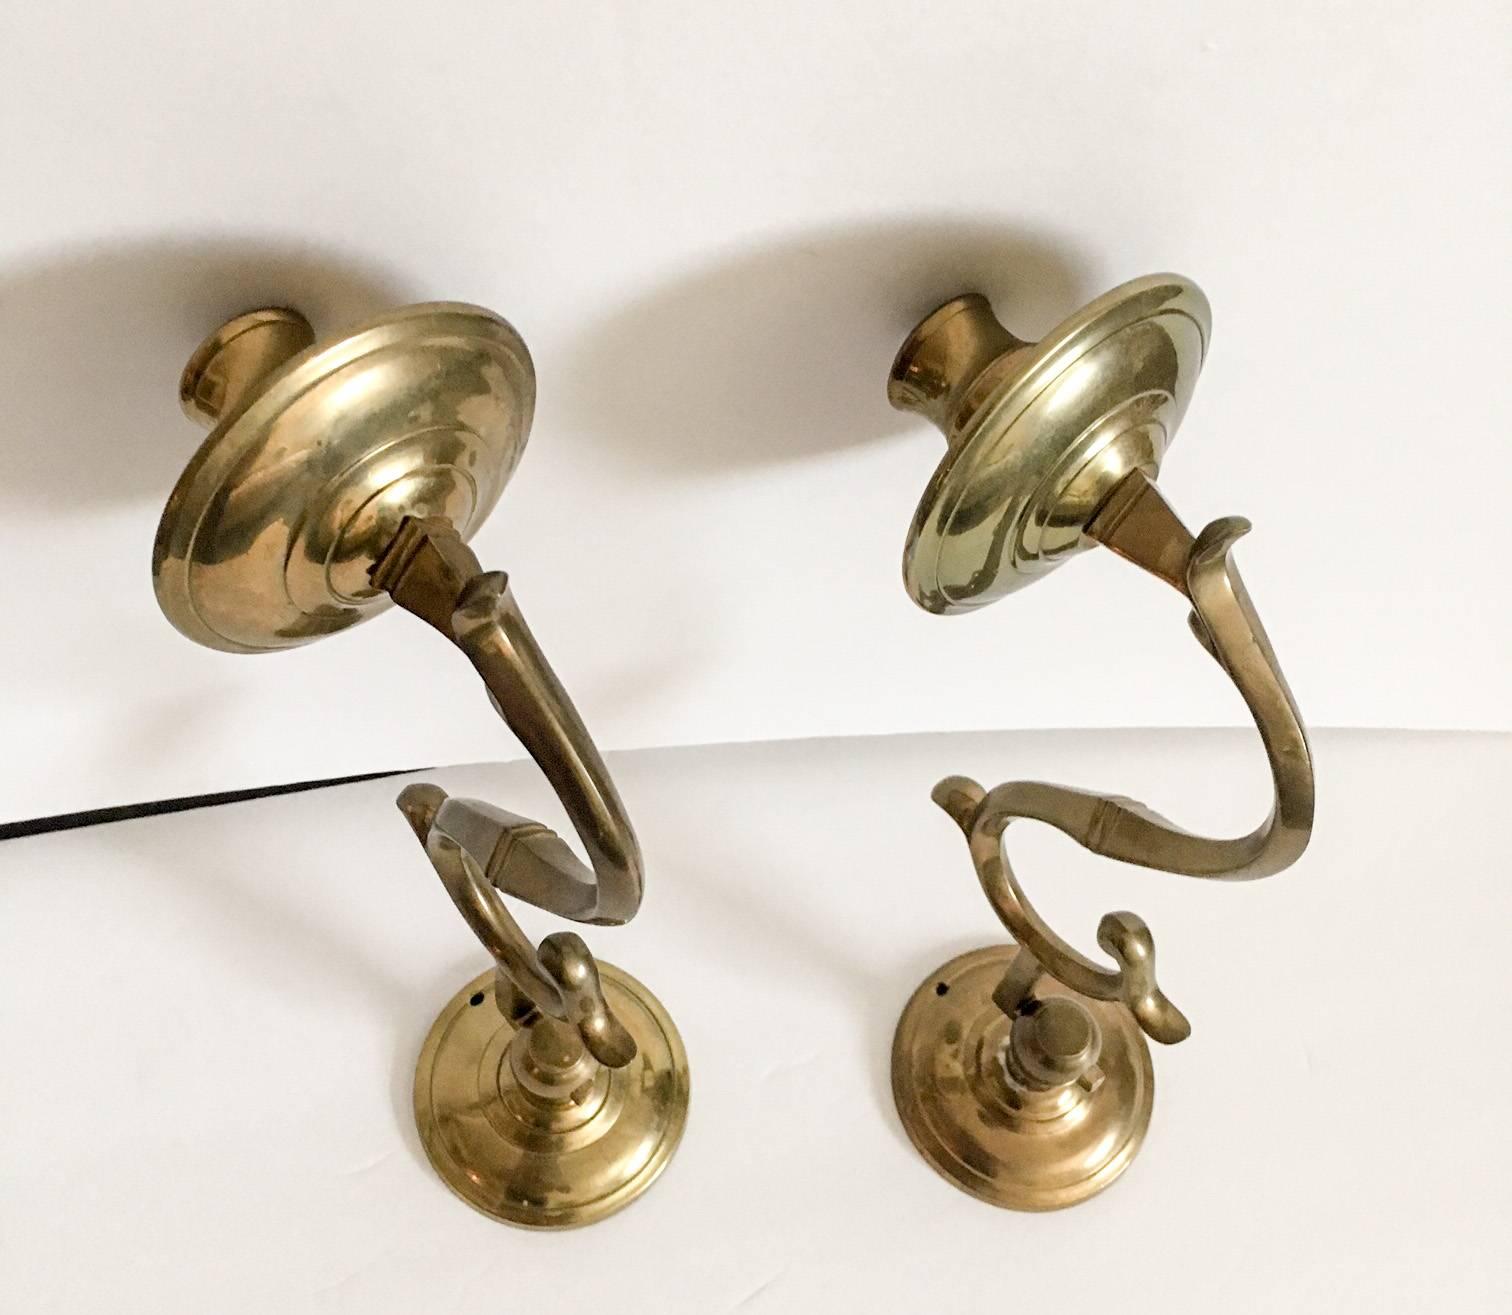 Handsome set of two Mottahedeh solid brass single arm colonial-style candle sconces with wall plates. Each arm hooks into the wall plates as shown. Wall plates attach to the wall with two brass screws, not included. Original Made in India stickers